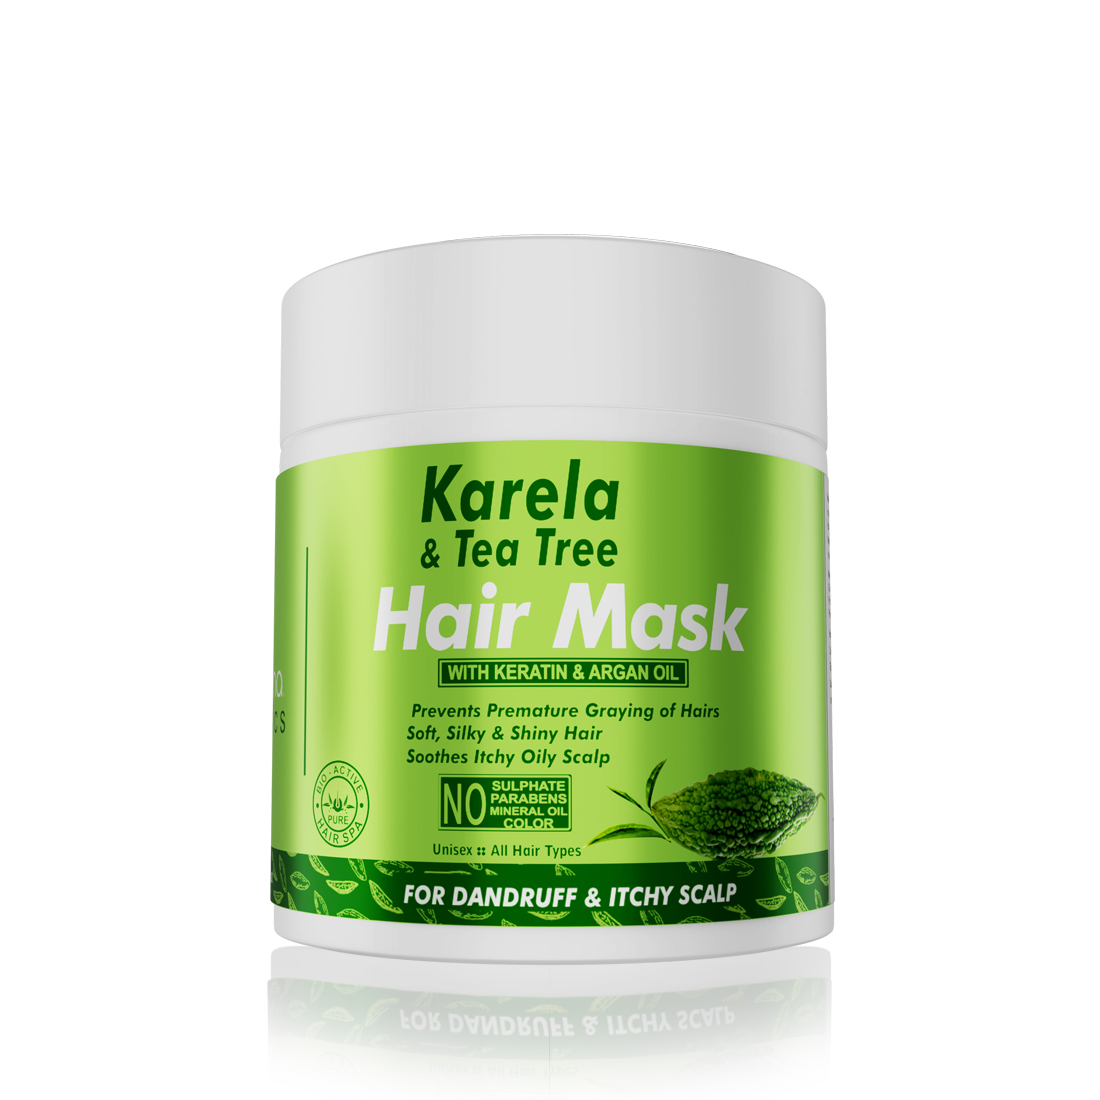 10 Best Recommended Hair Masks For Oily Hair